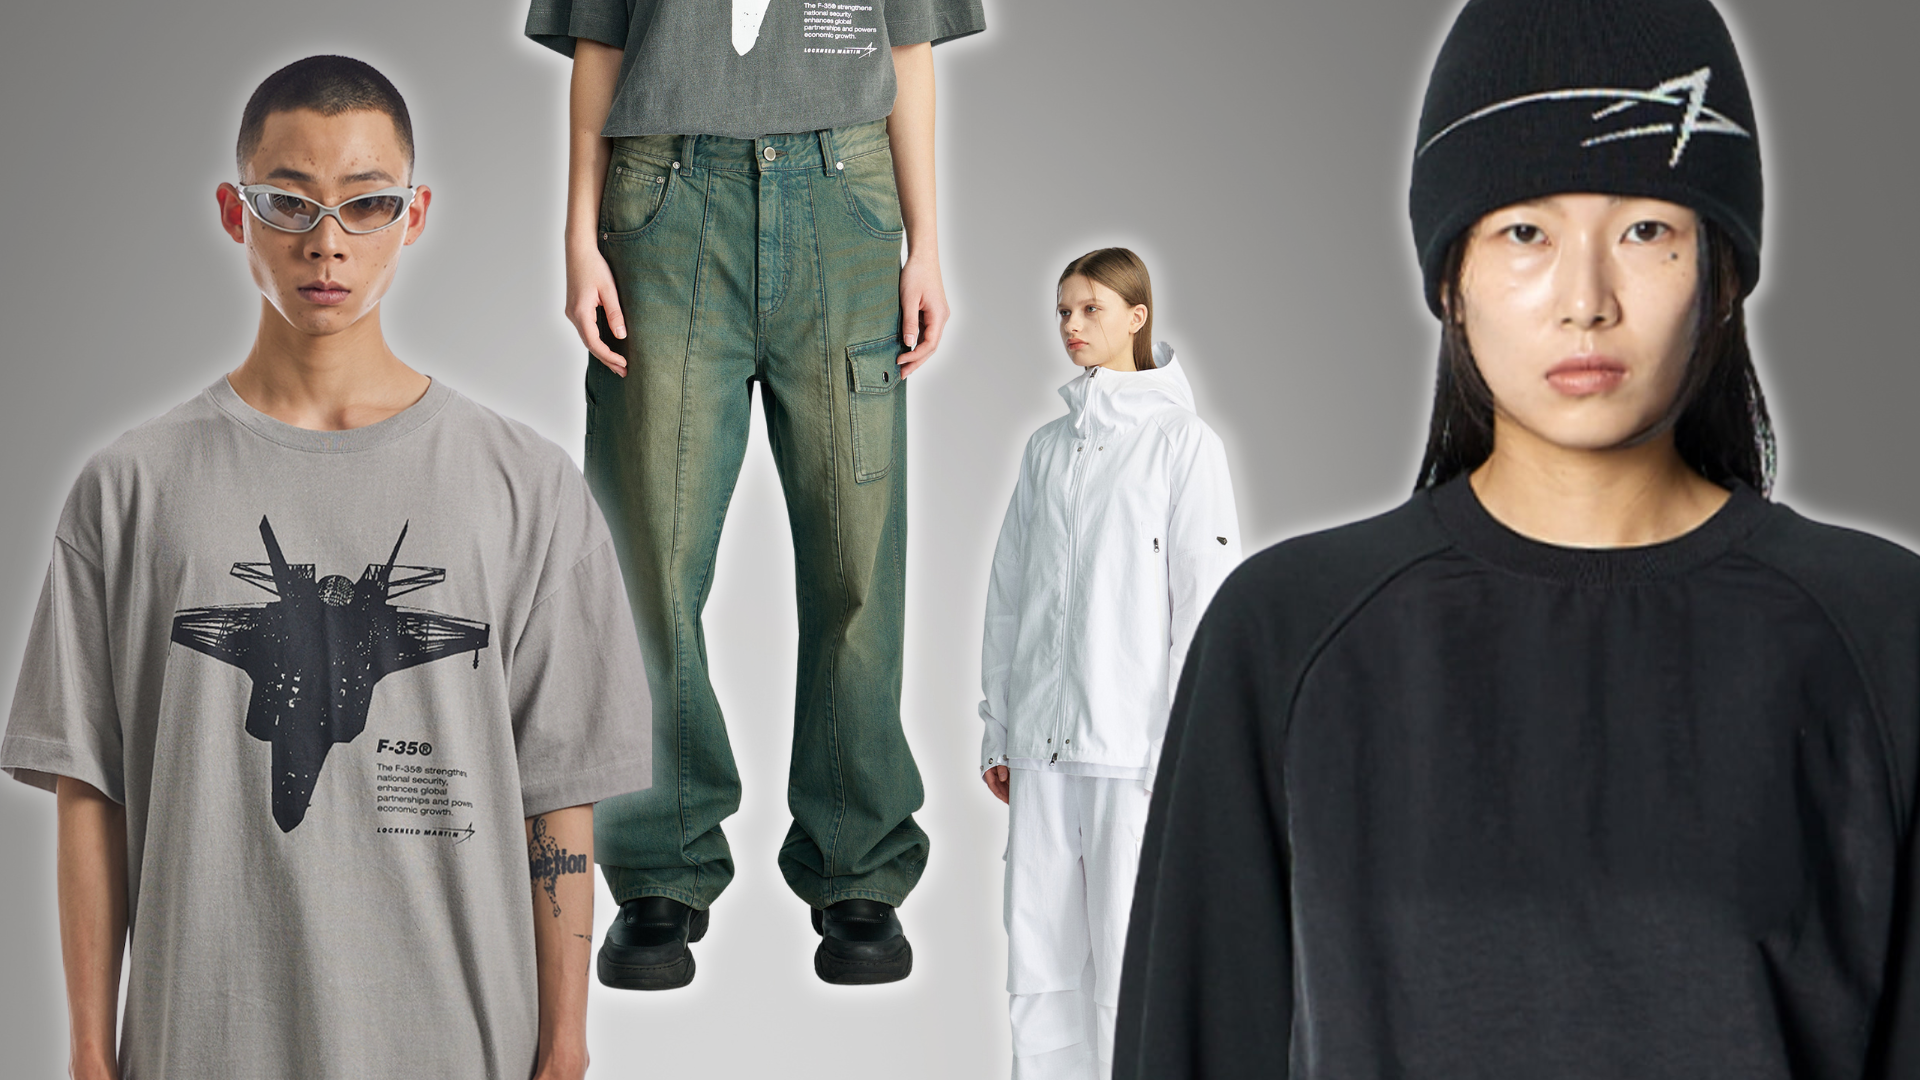 Four designs from Lockheed Martin Apparel, all streetwear mostly in whites, grays, and blacks.